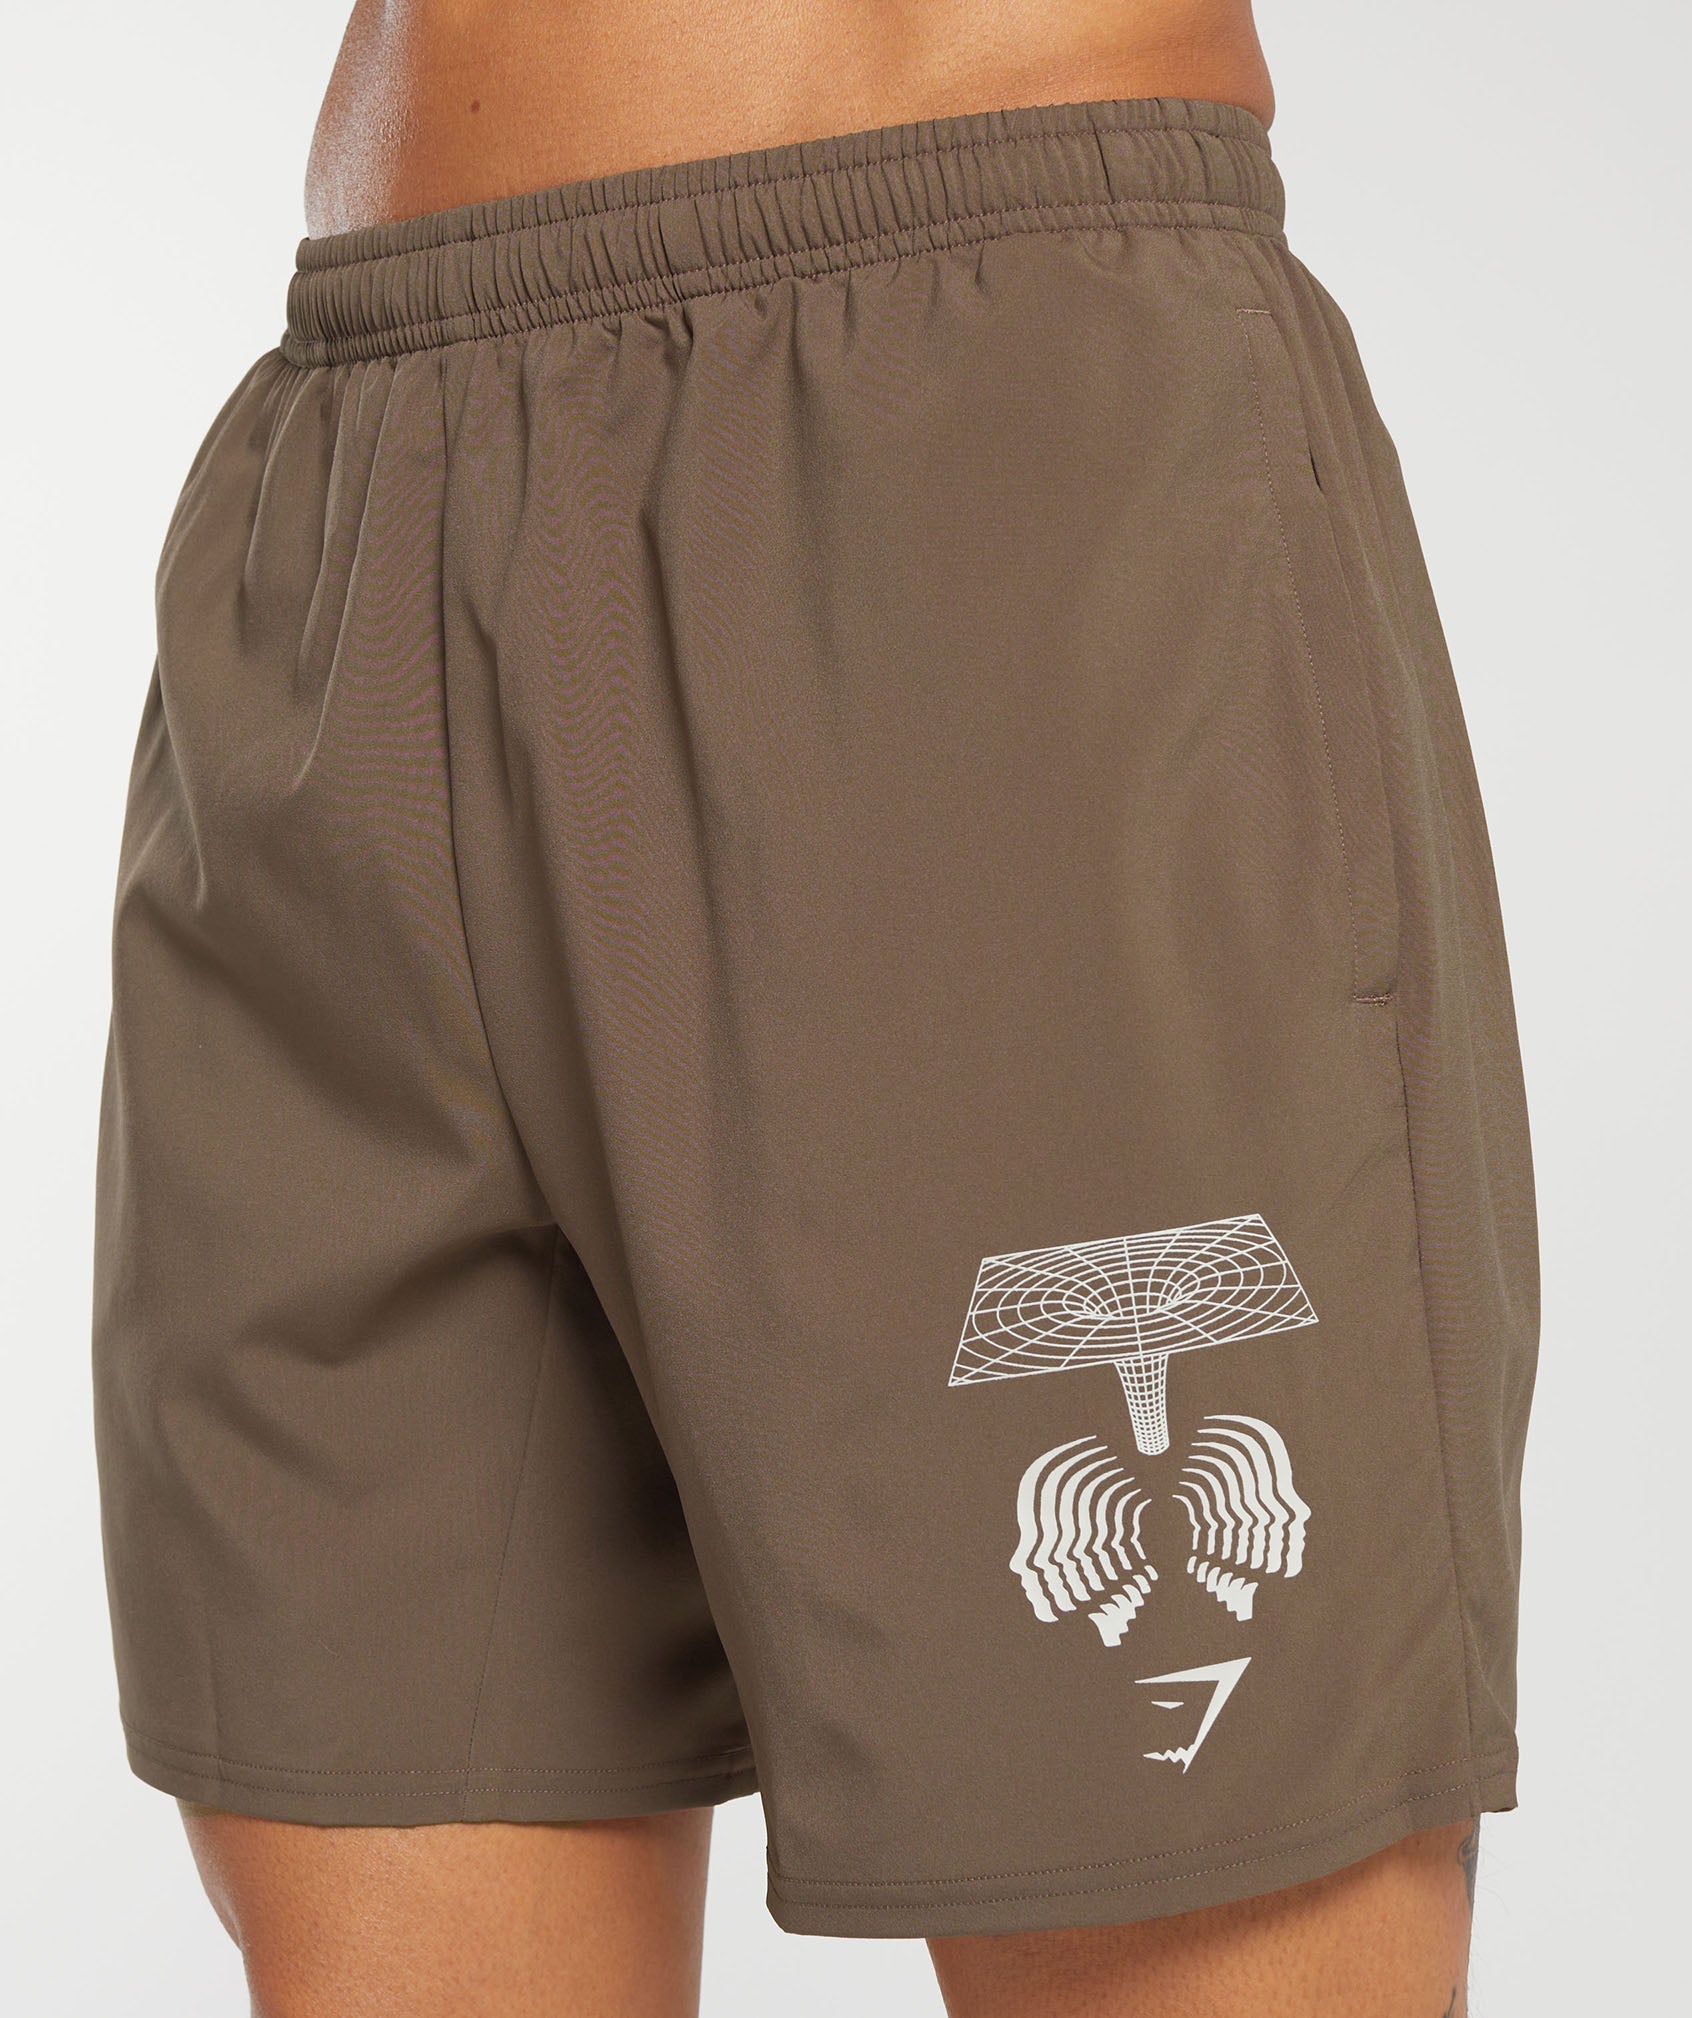 Hybrid Wellness 7" Shorts in Penny Brown - view 5